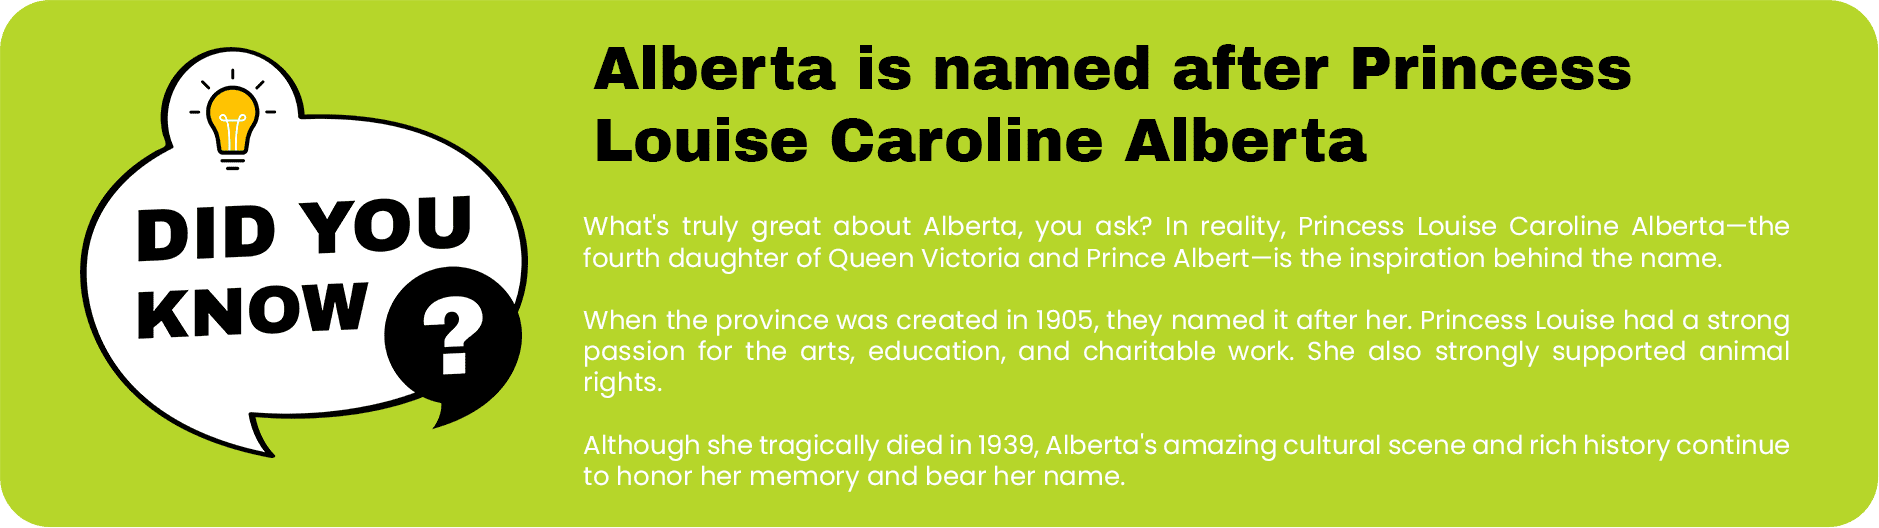 Professional banner explaining the origin of Alberta's preferred name, which was inspired by Princess Louise Caroline Alberta, Queen Victoria's fourth daughter.